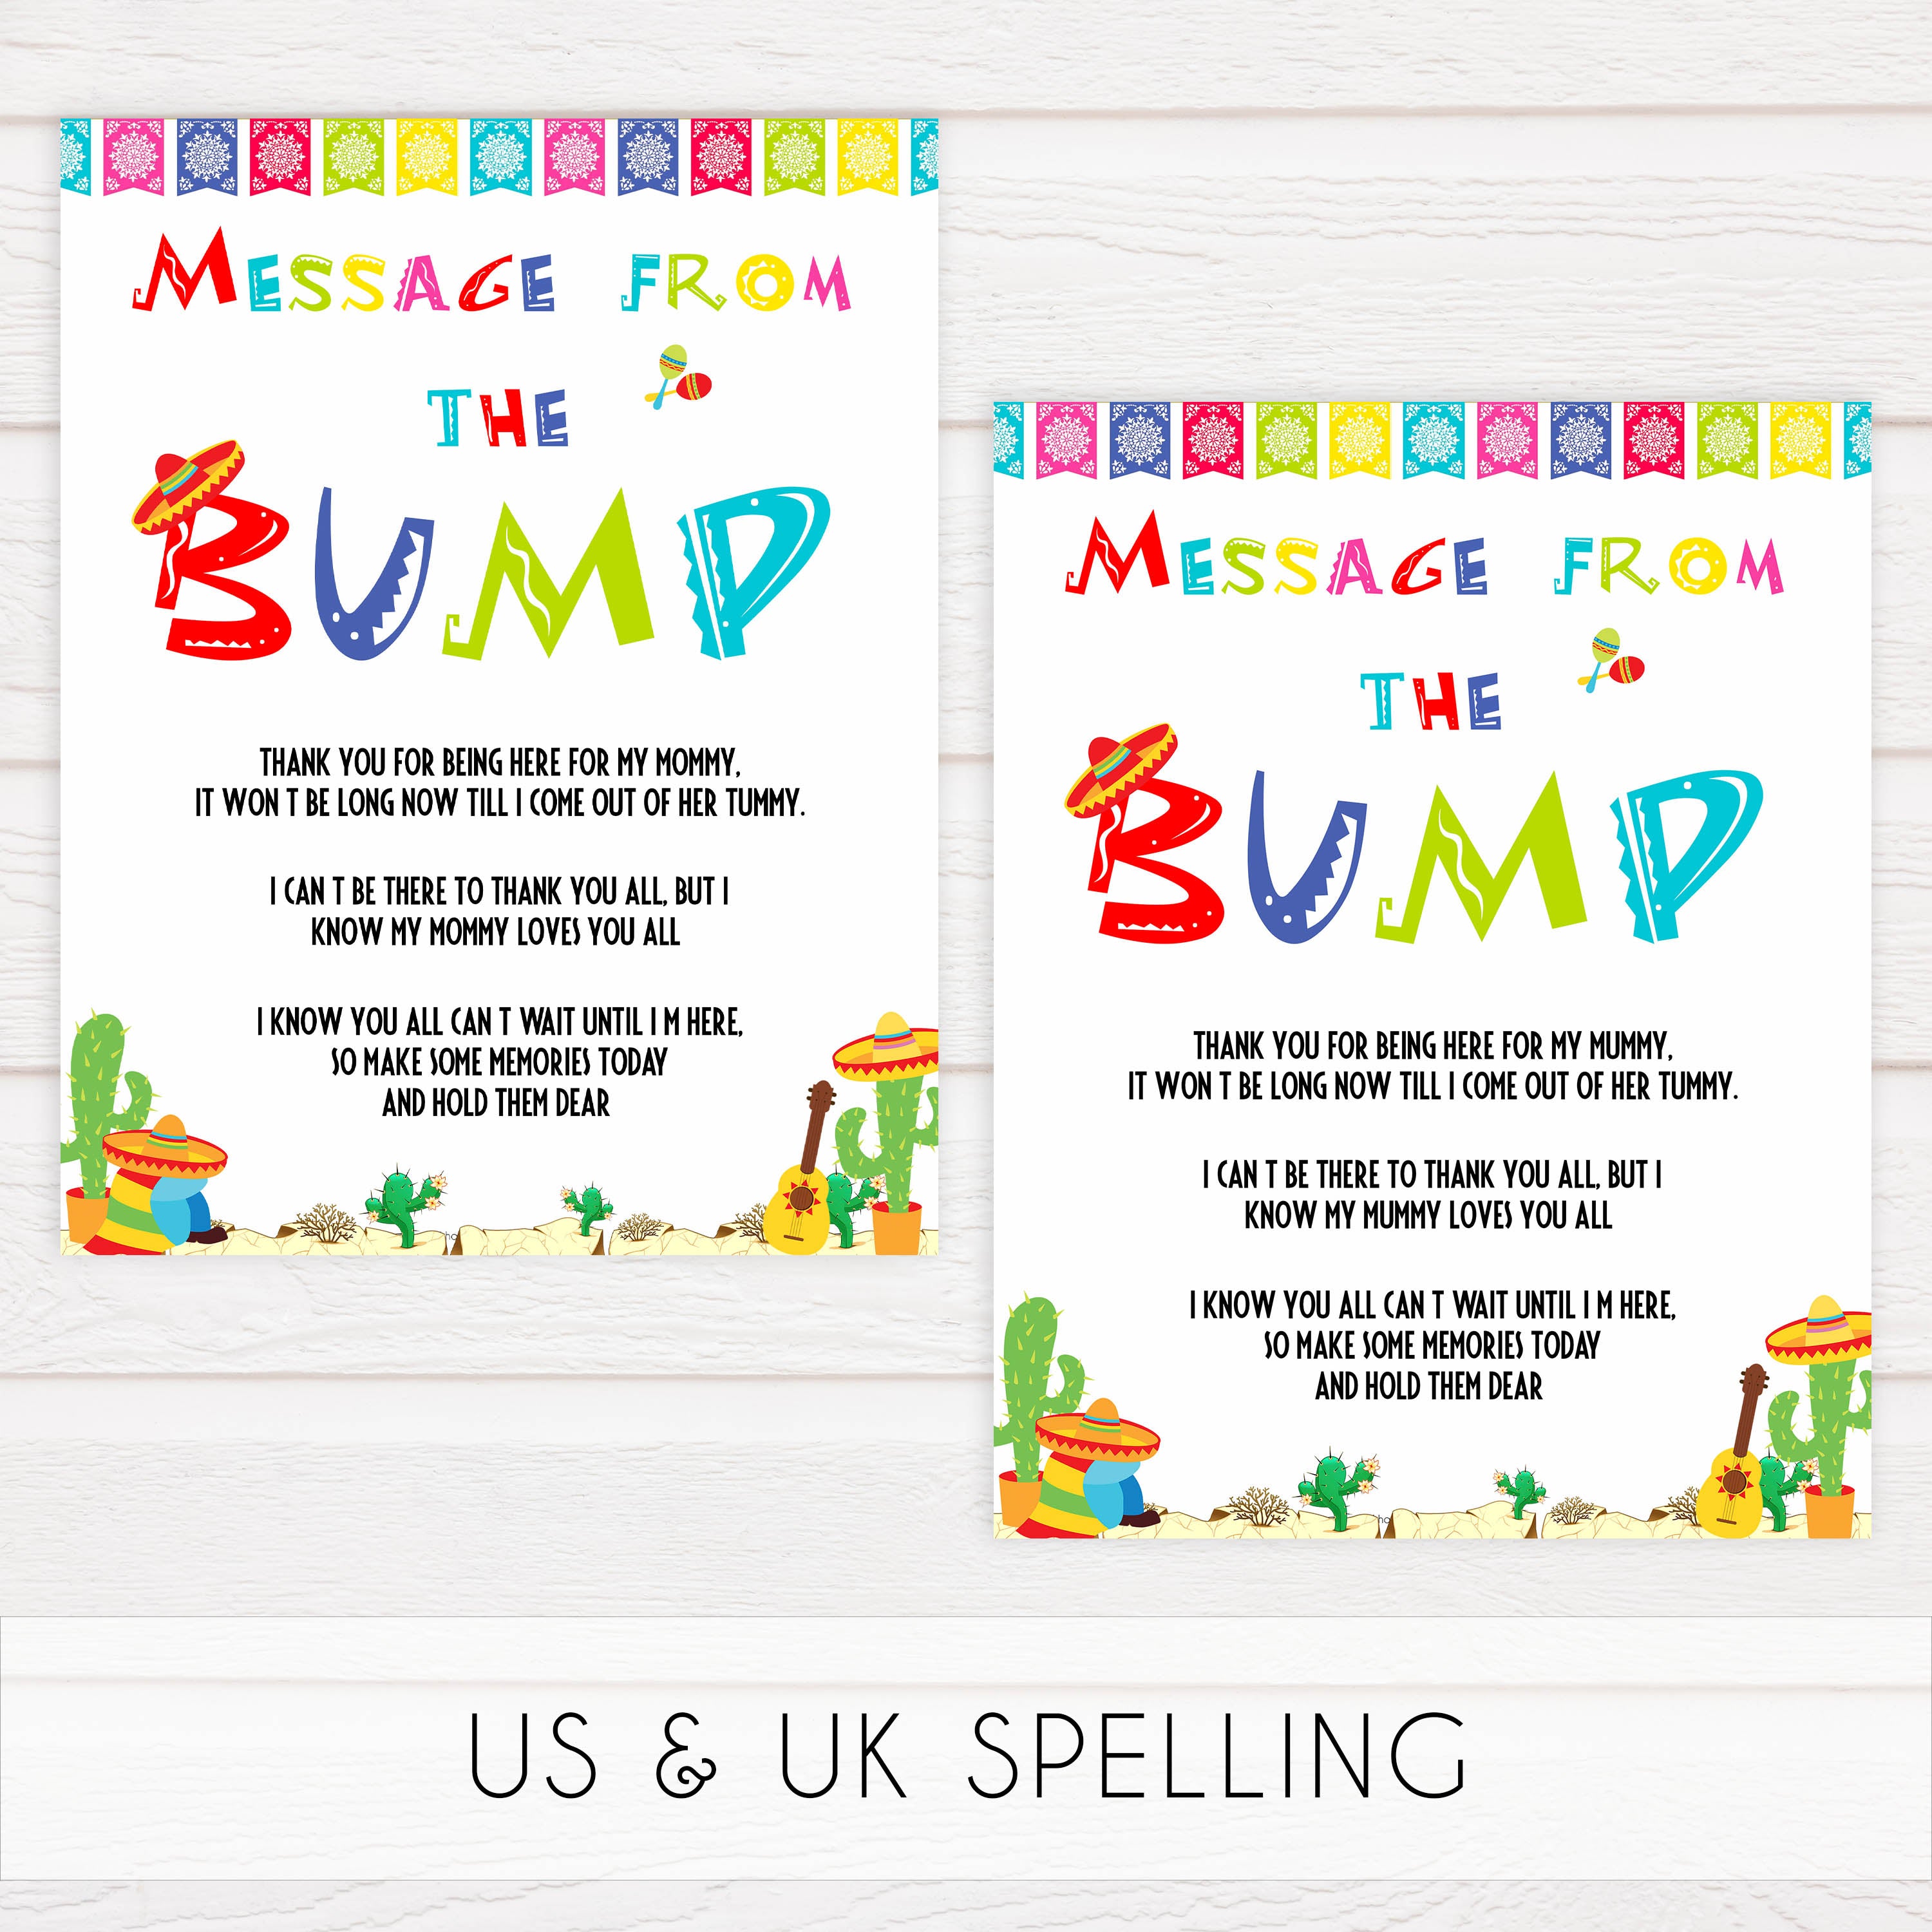 message from the bump game, Printable baby shower games, Mexican fiesta fun baby games, baby shower games, fun baby shower ideas, top baby shower ideas, fiesta shower baby shower, fiesta baby shower ideas